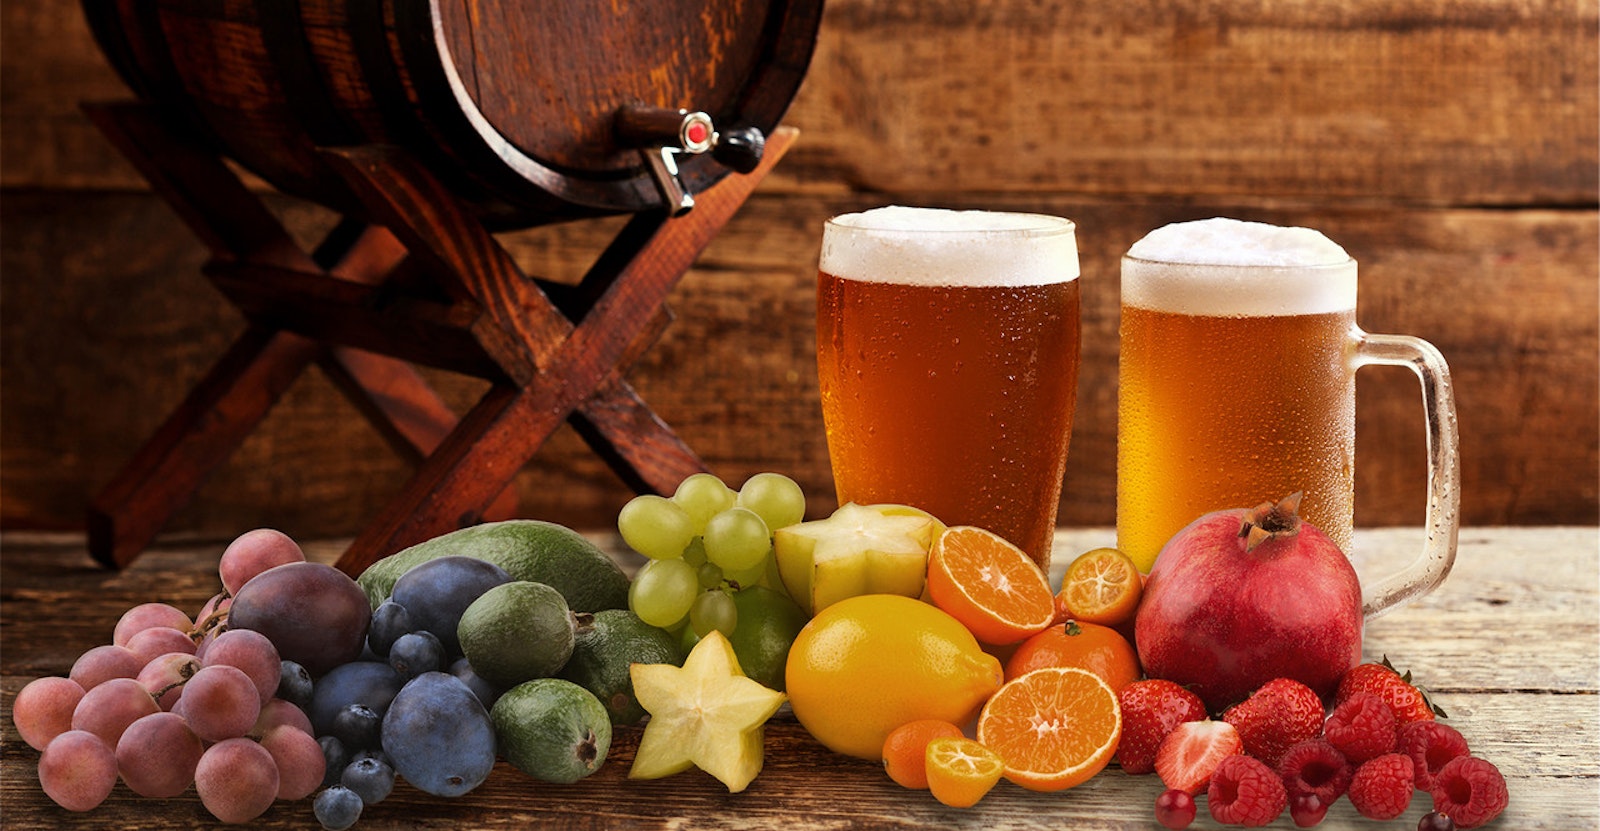 Fruit Beer Market Size 2022: Share, Industry Trends, Analysis, Growth Rate, and Forecast Report 2027 1